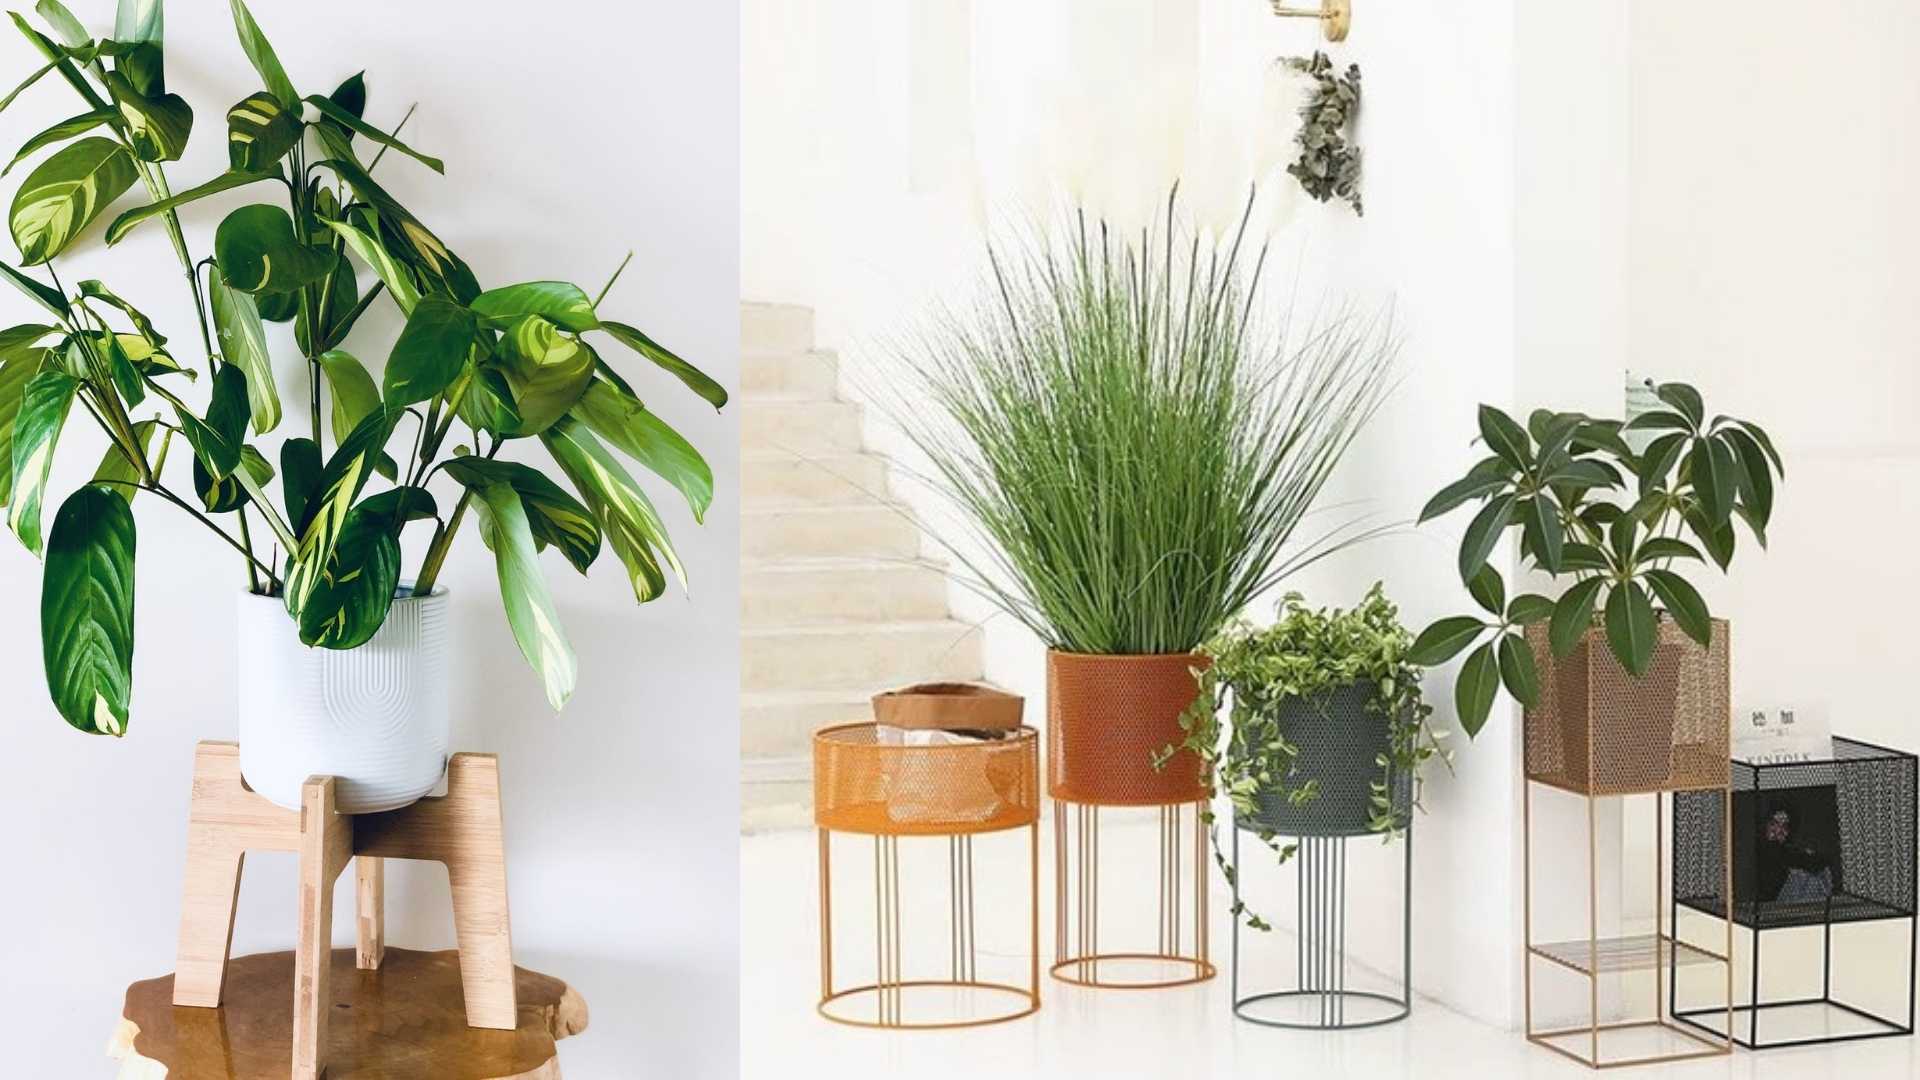 A variety of different plant stands containing monsterras and other plants.